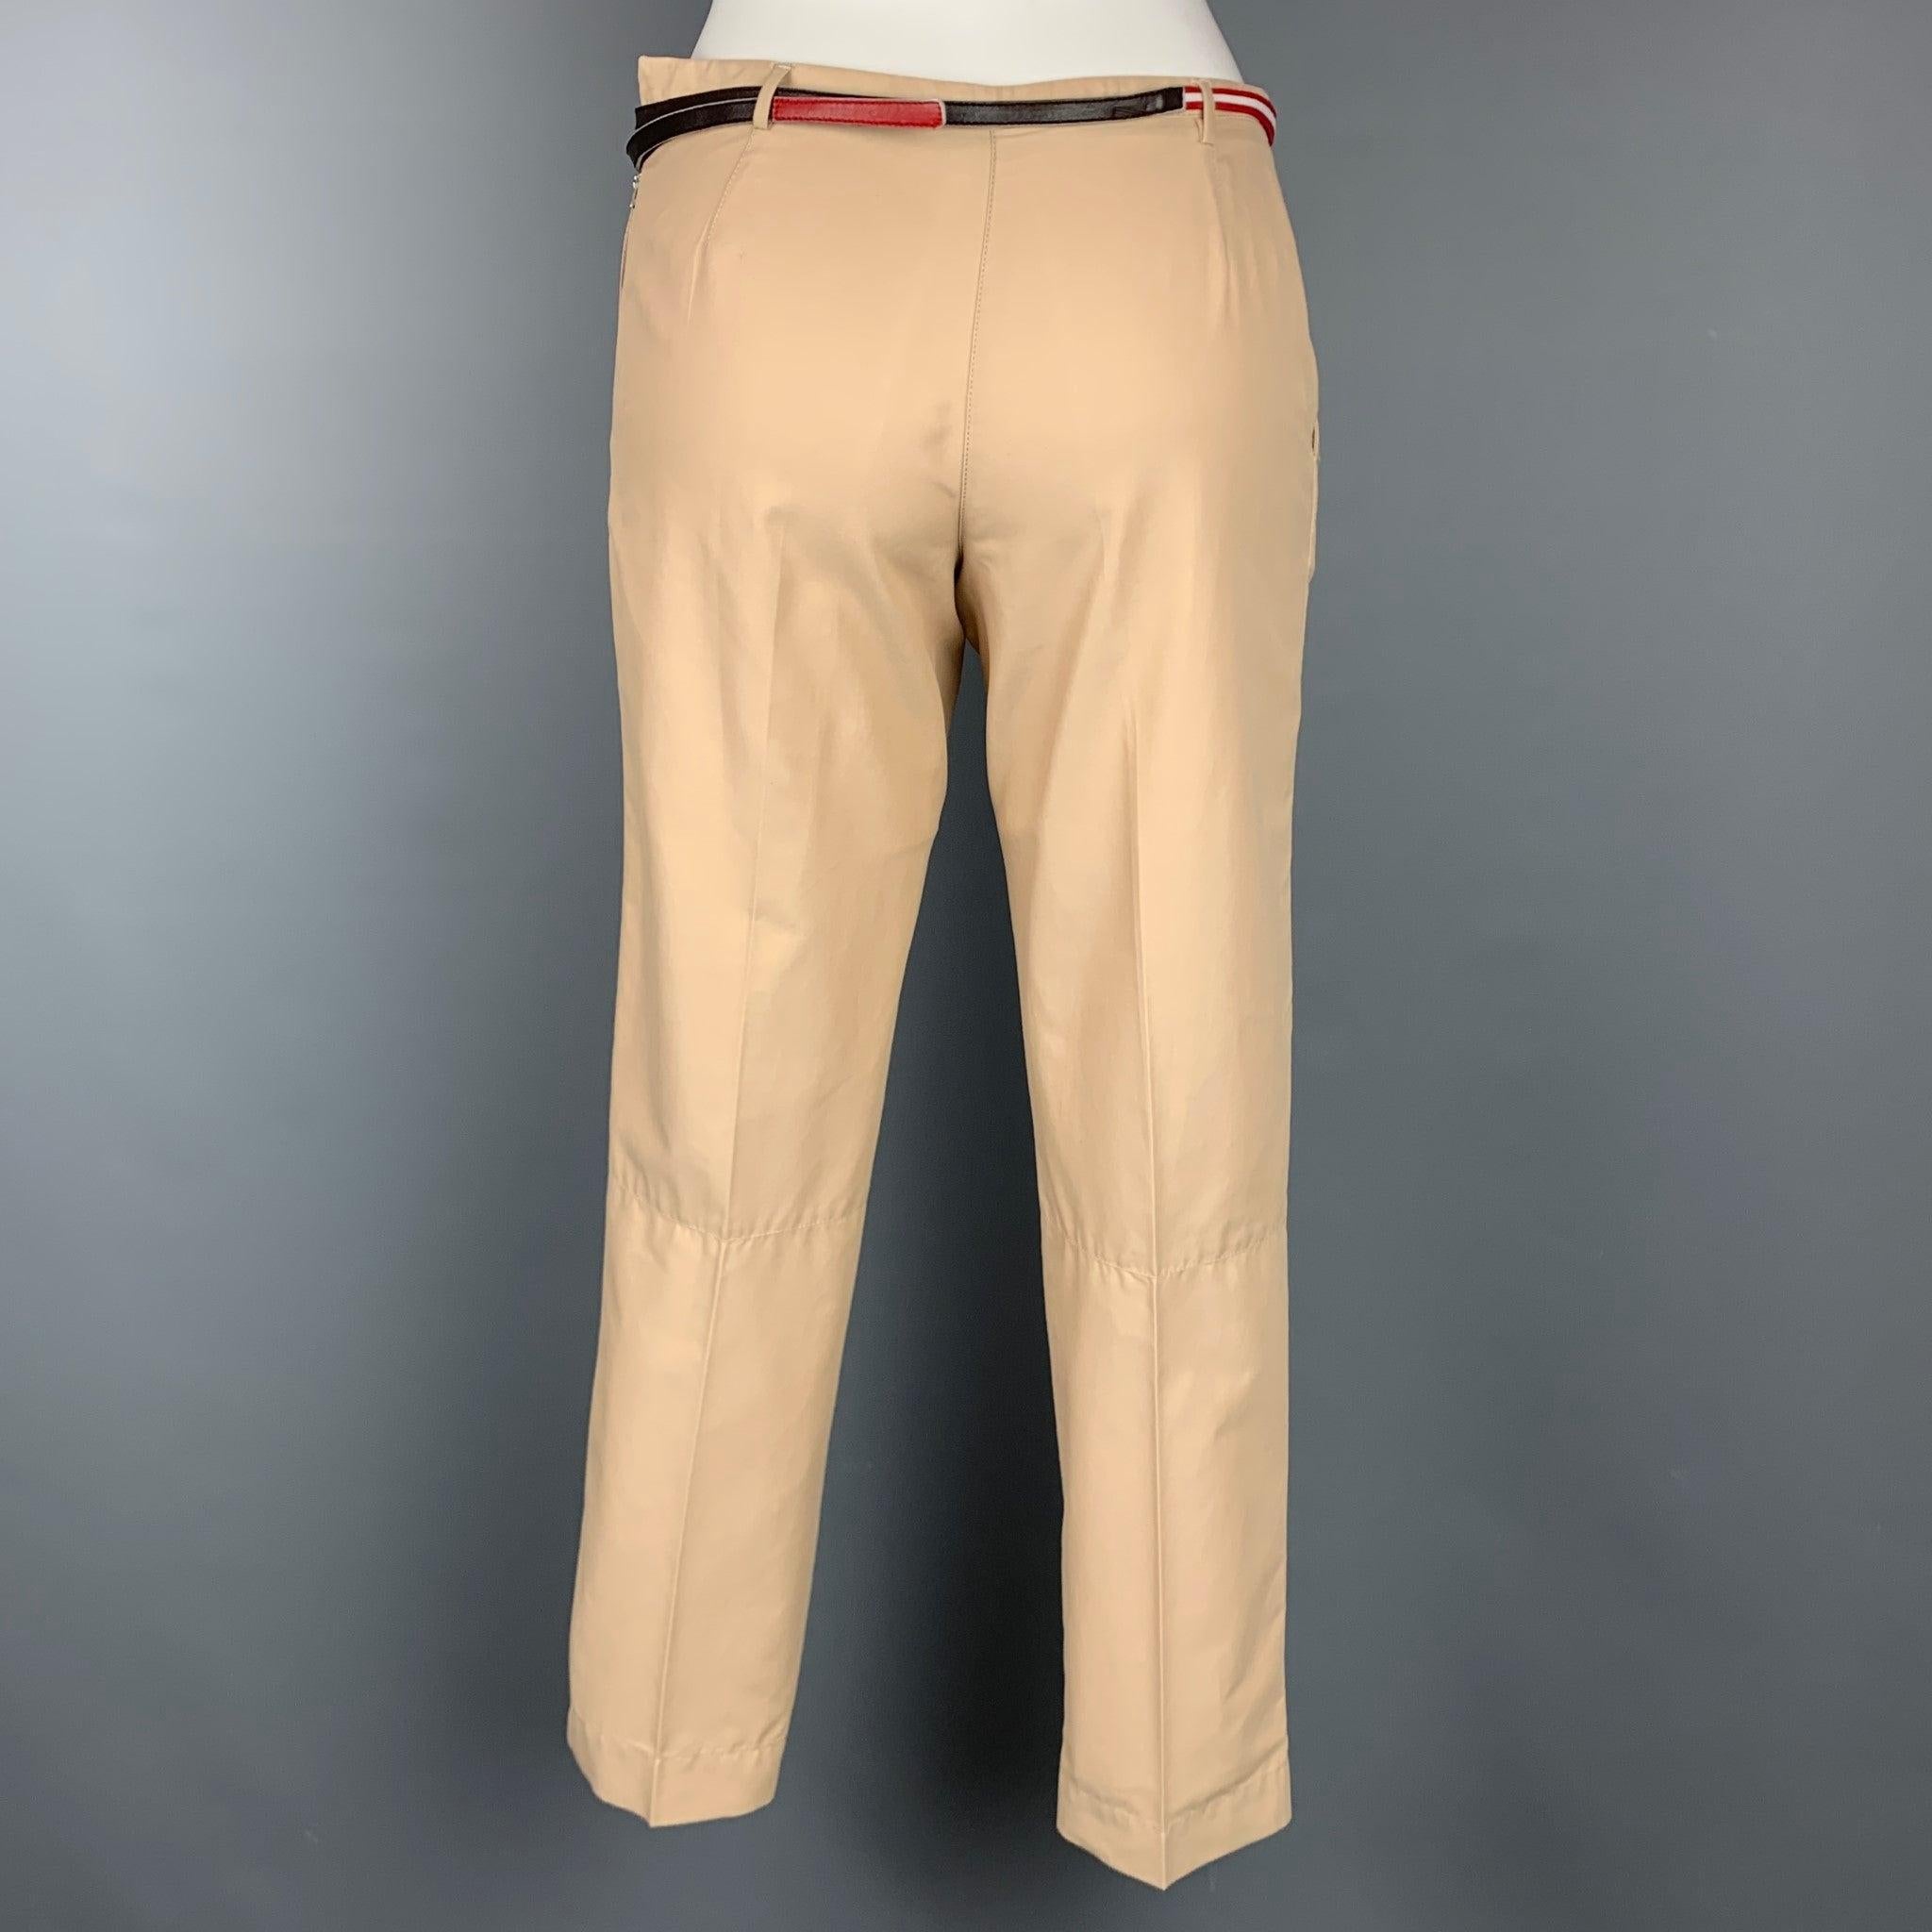 PRADA dress pants comes in a beige cotton / nylon featuring a straight leg, belted, and a side zipper closure. Made in Italy.Very Good
Pre-Owned Condition. 

Marked:   38 

Measurements: 
  Waist: 26 inches  Rise: 8 inches  Inseam: 28 inches 
  
  
